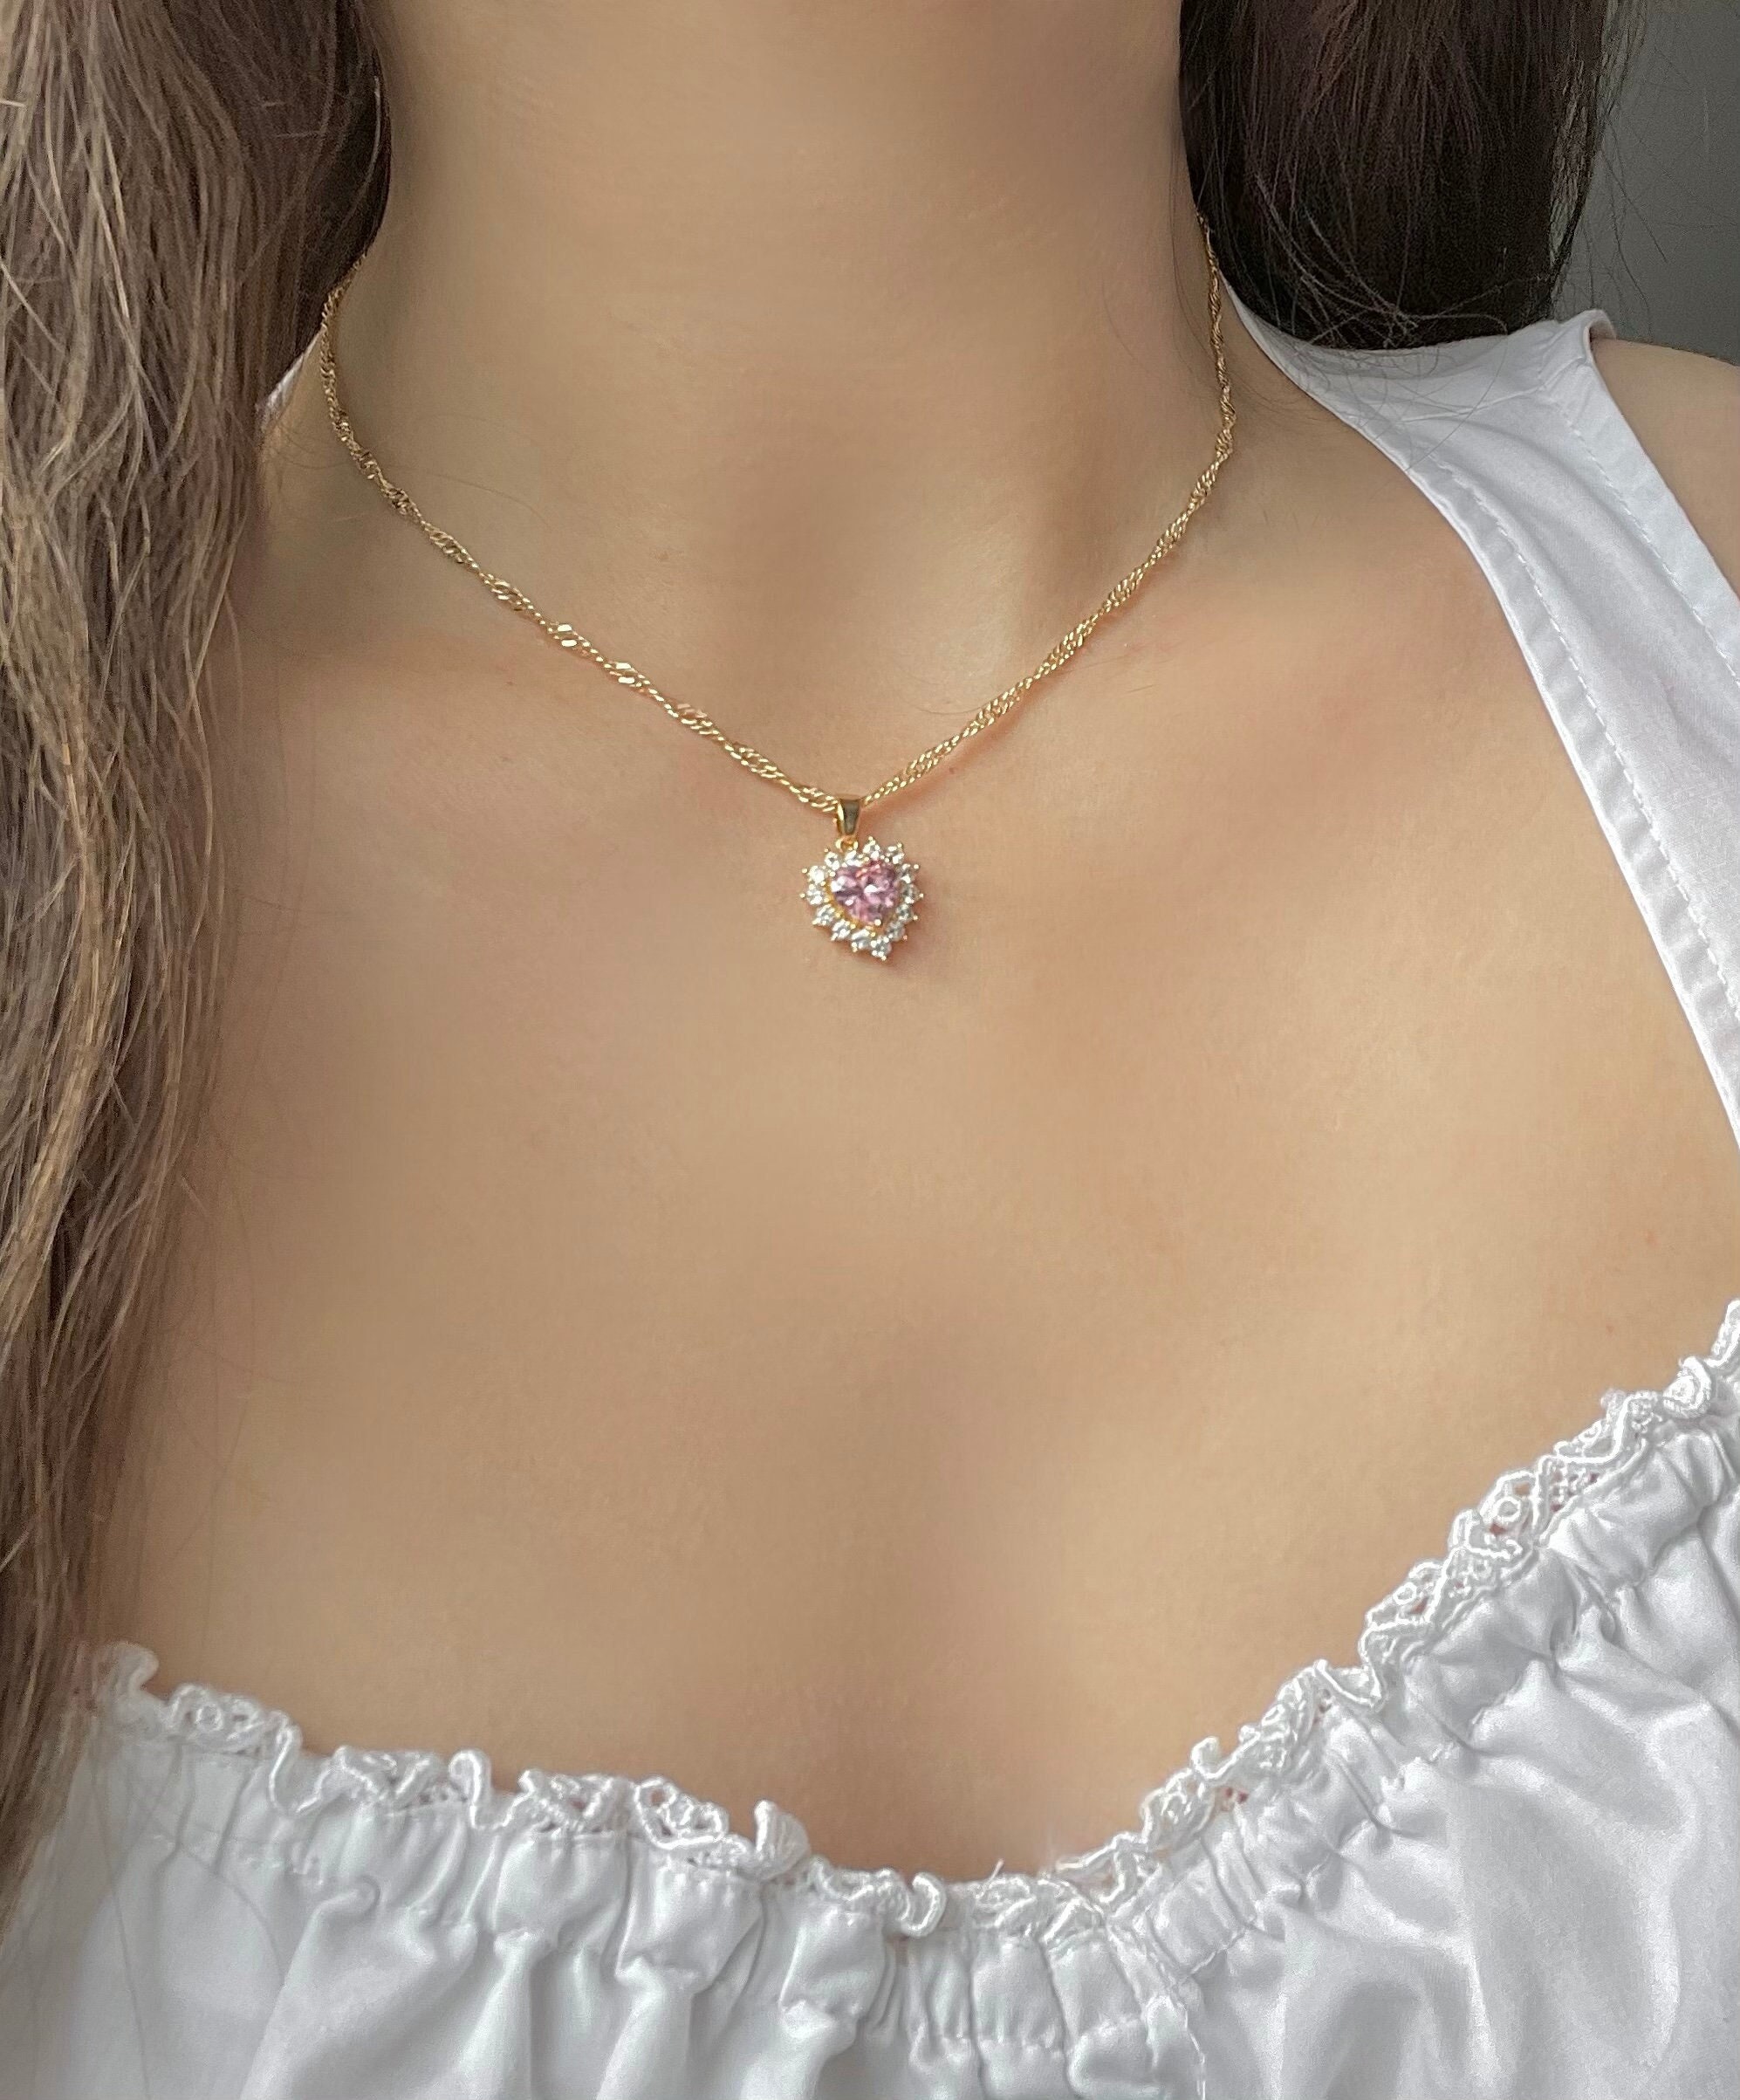 18K Gold Heart Necklace, Halo Diamond Heart Jewelry, Wedding Jewelry,  Wedding Necklace, Christmas Gift, Pink Heart Necklace, Pink Gifts